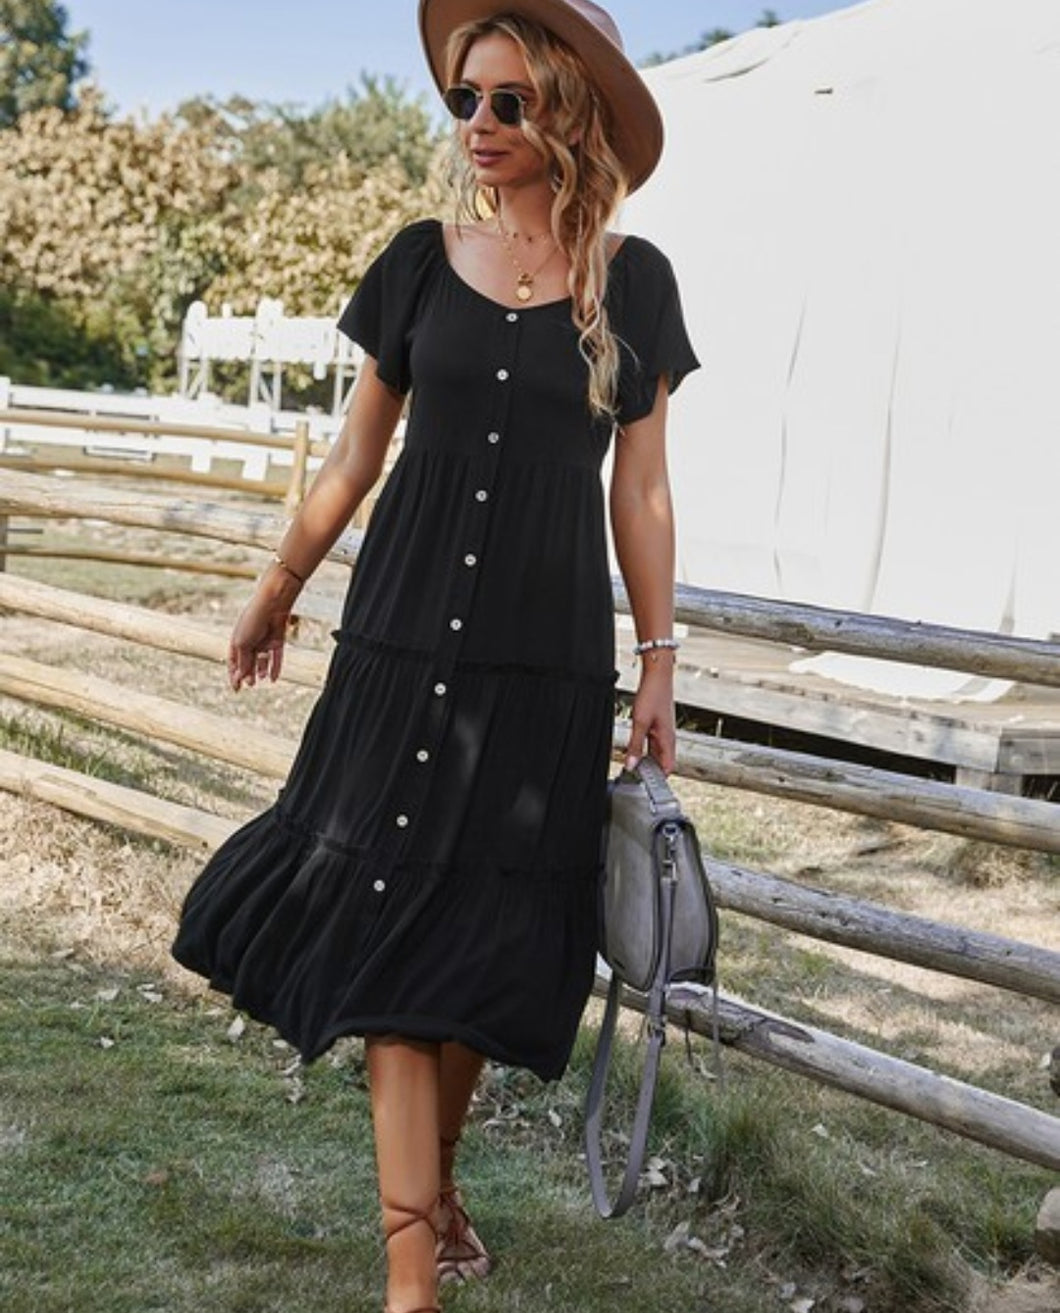 Black Short Sleeve Dress With Buttons Down The Front